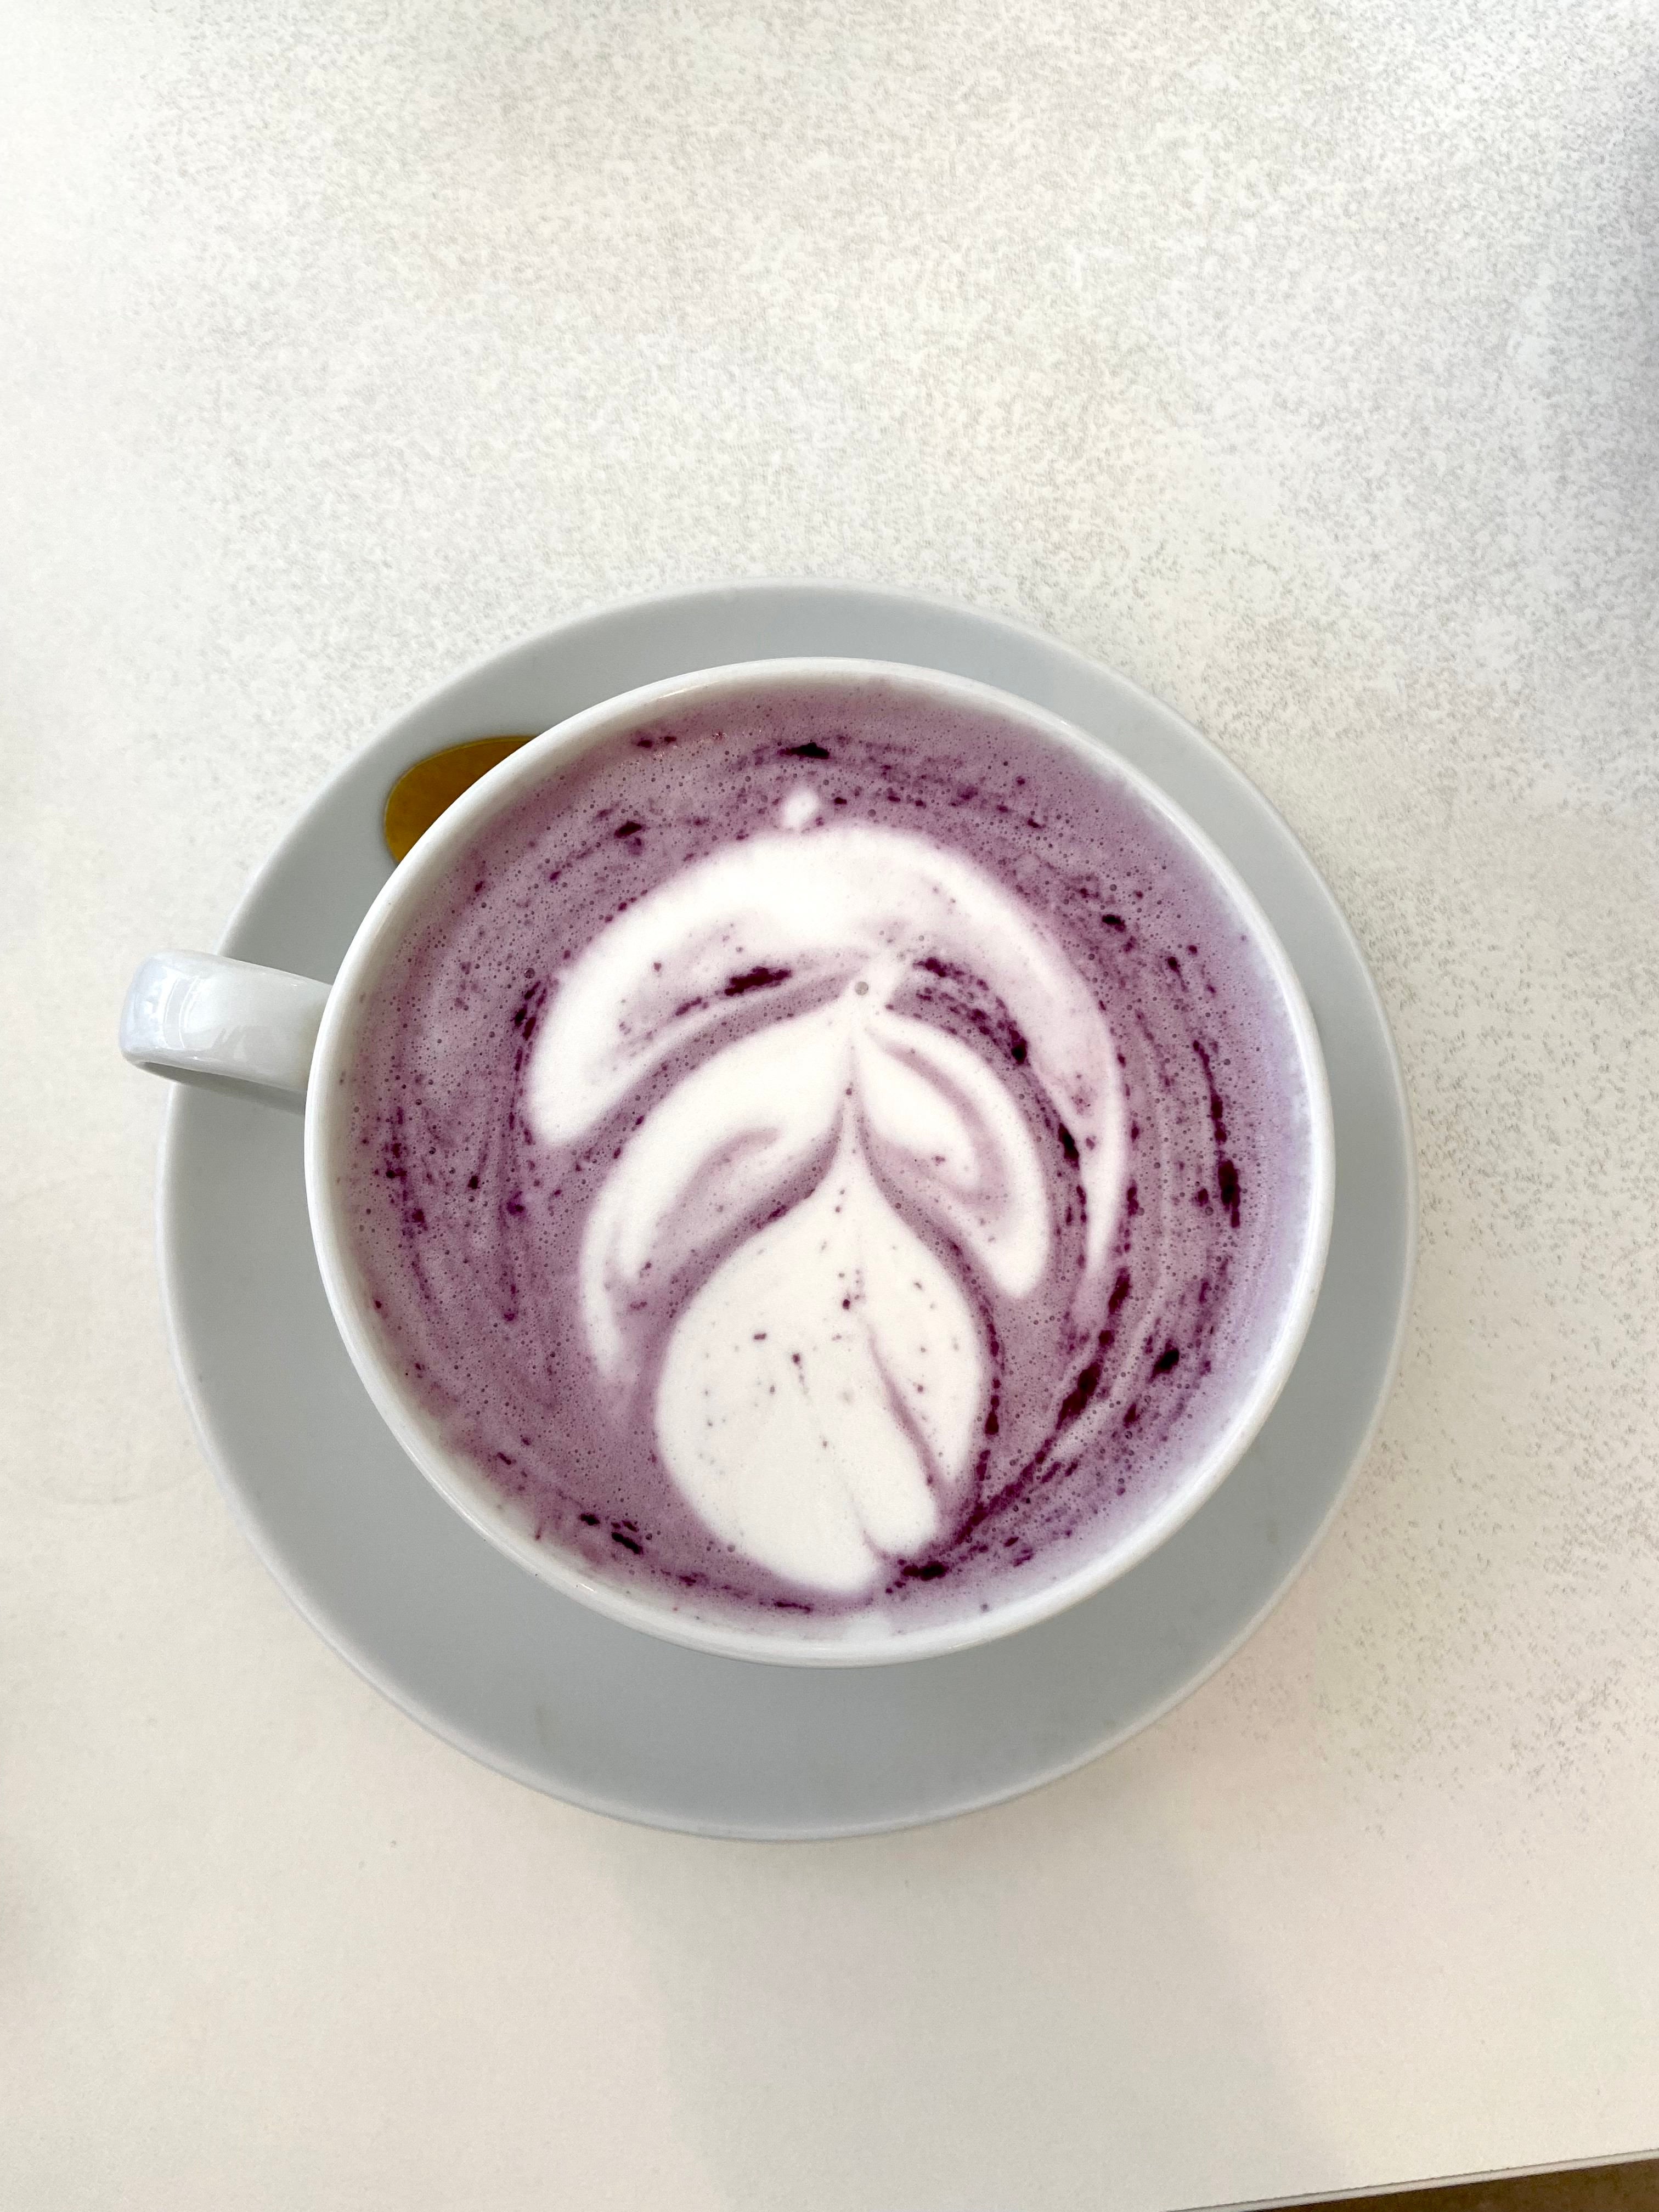 Lavender and apple latte, gorgeous to look at, but it doesn’t beat a regular milk and espresso latte